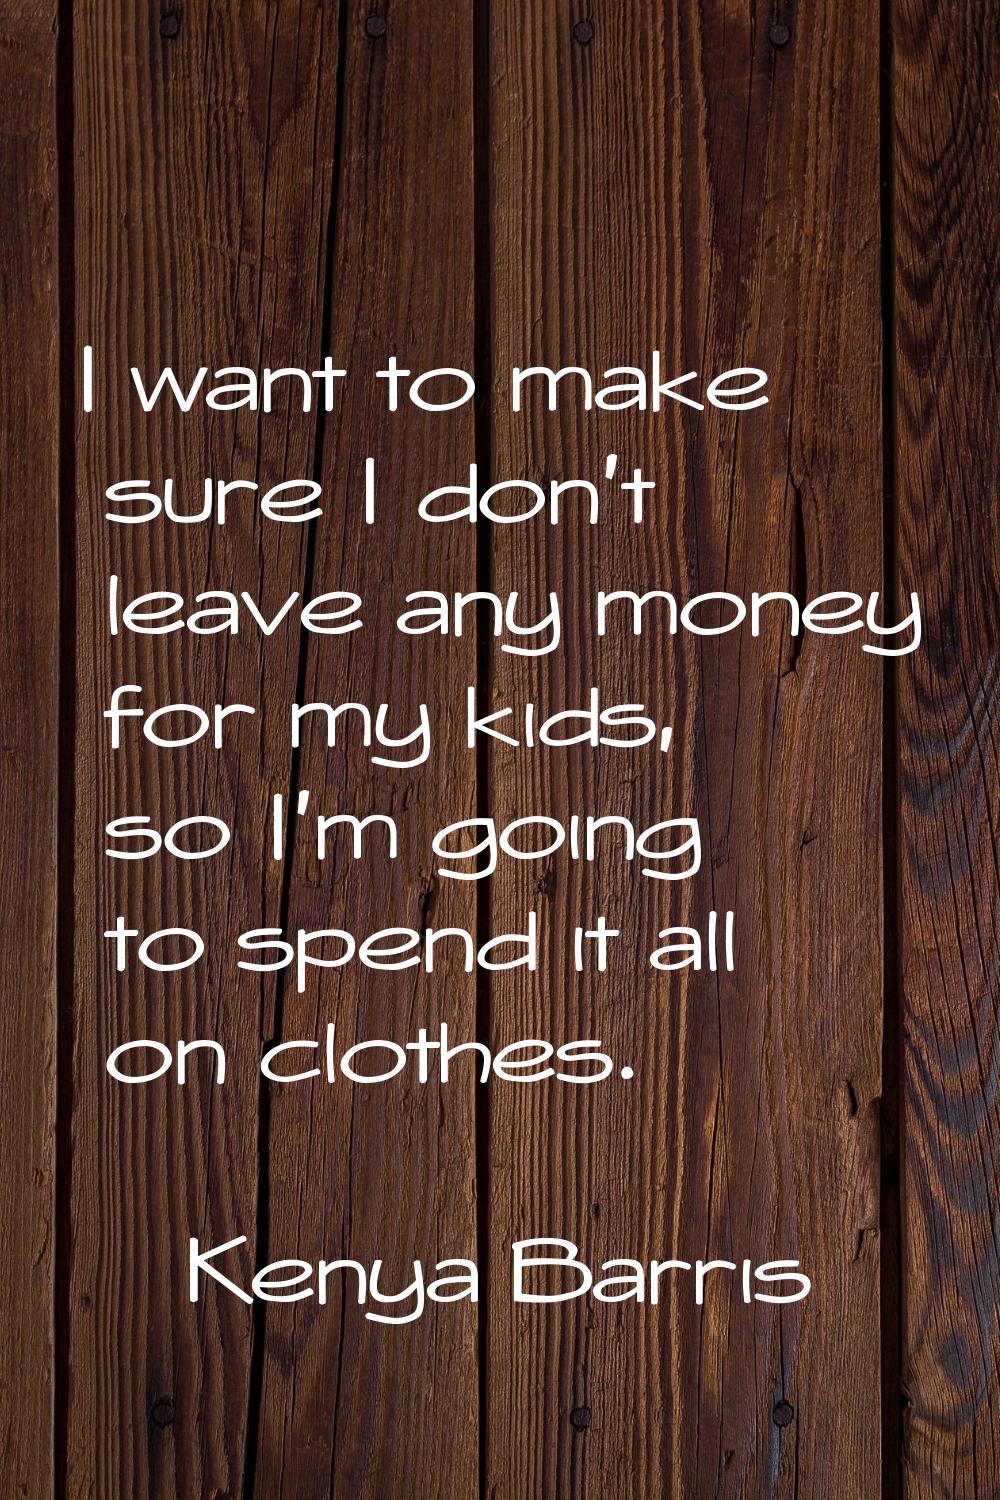 I want to make sure I don't leave any money for my kids, so I'm going to spend it all on clothes.